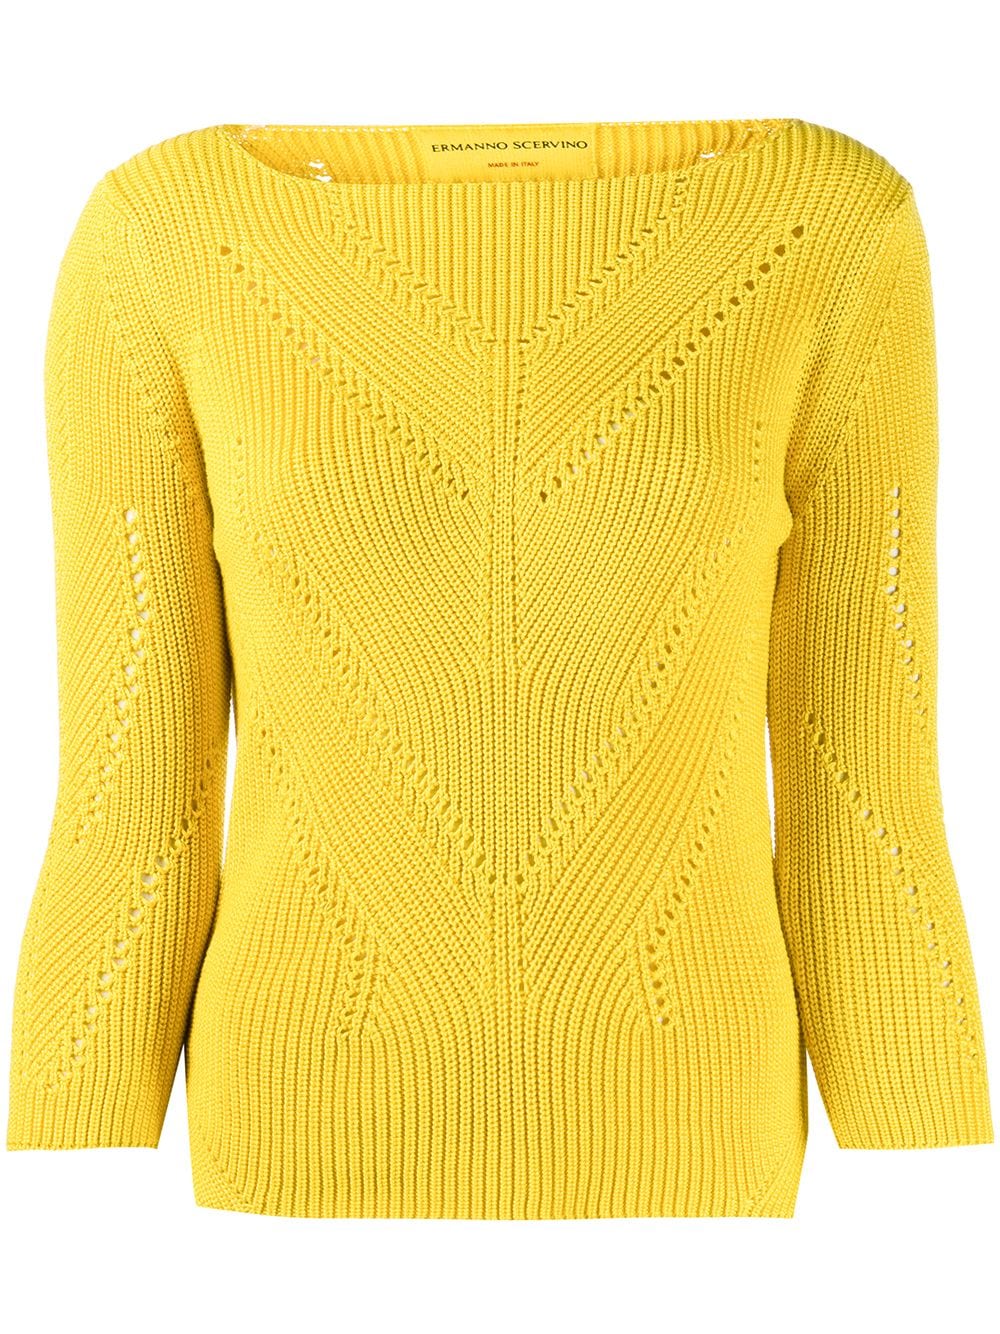 Ermanno Scervino Perforated Details Jumper In Yellow